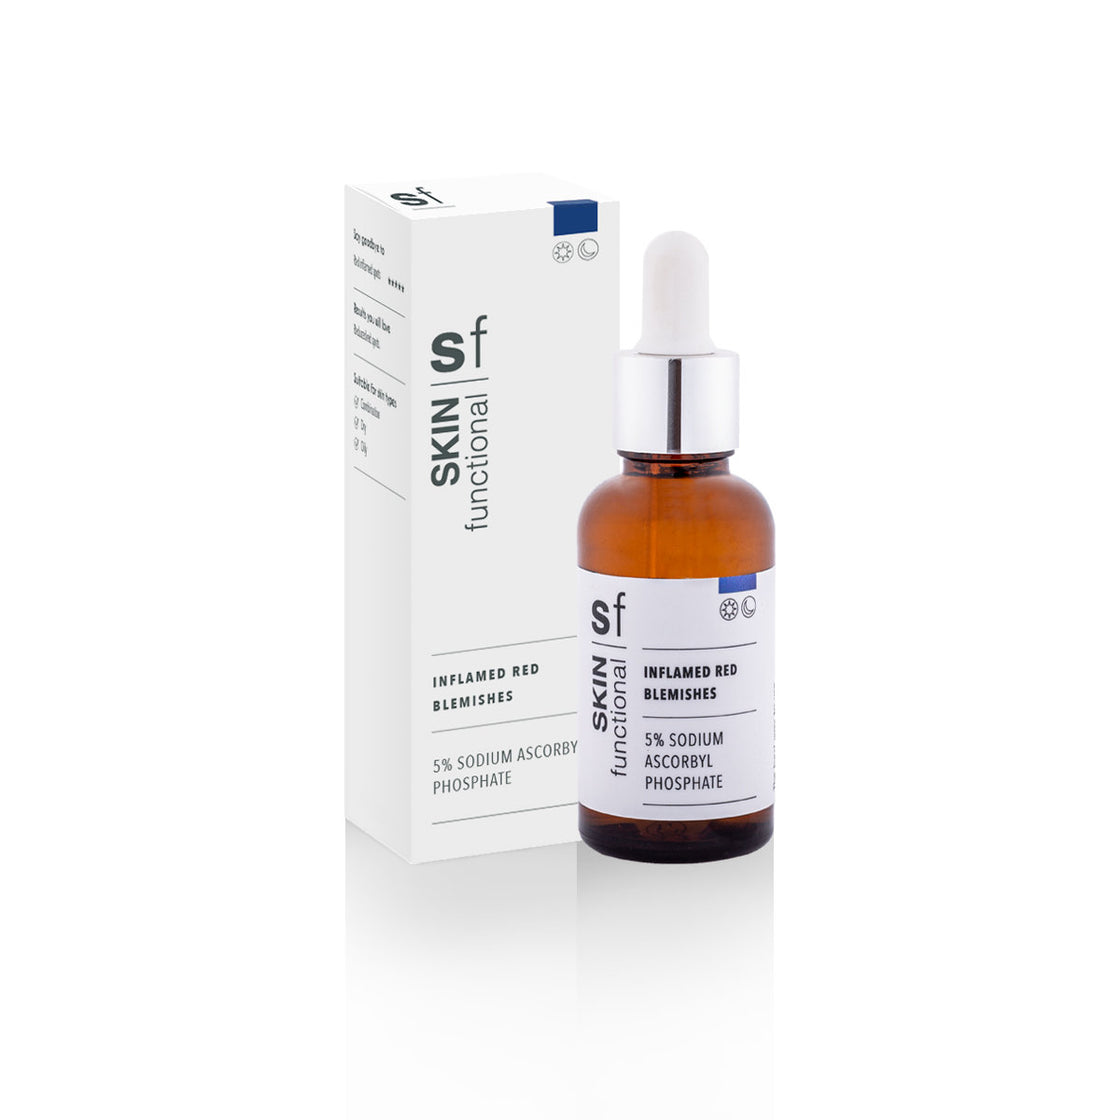 SKIN Functional Inflamed Red Blemishes | 5% Sodium Ascorbyl Phosphate